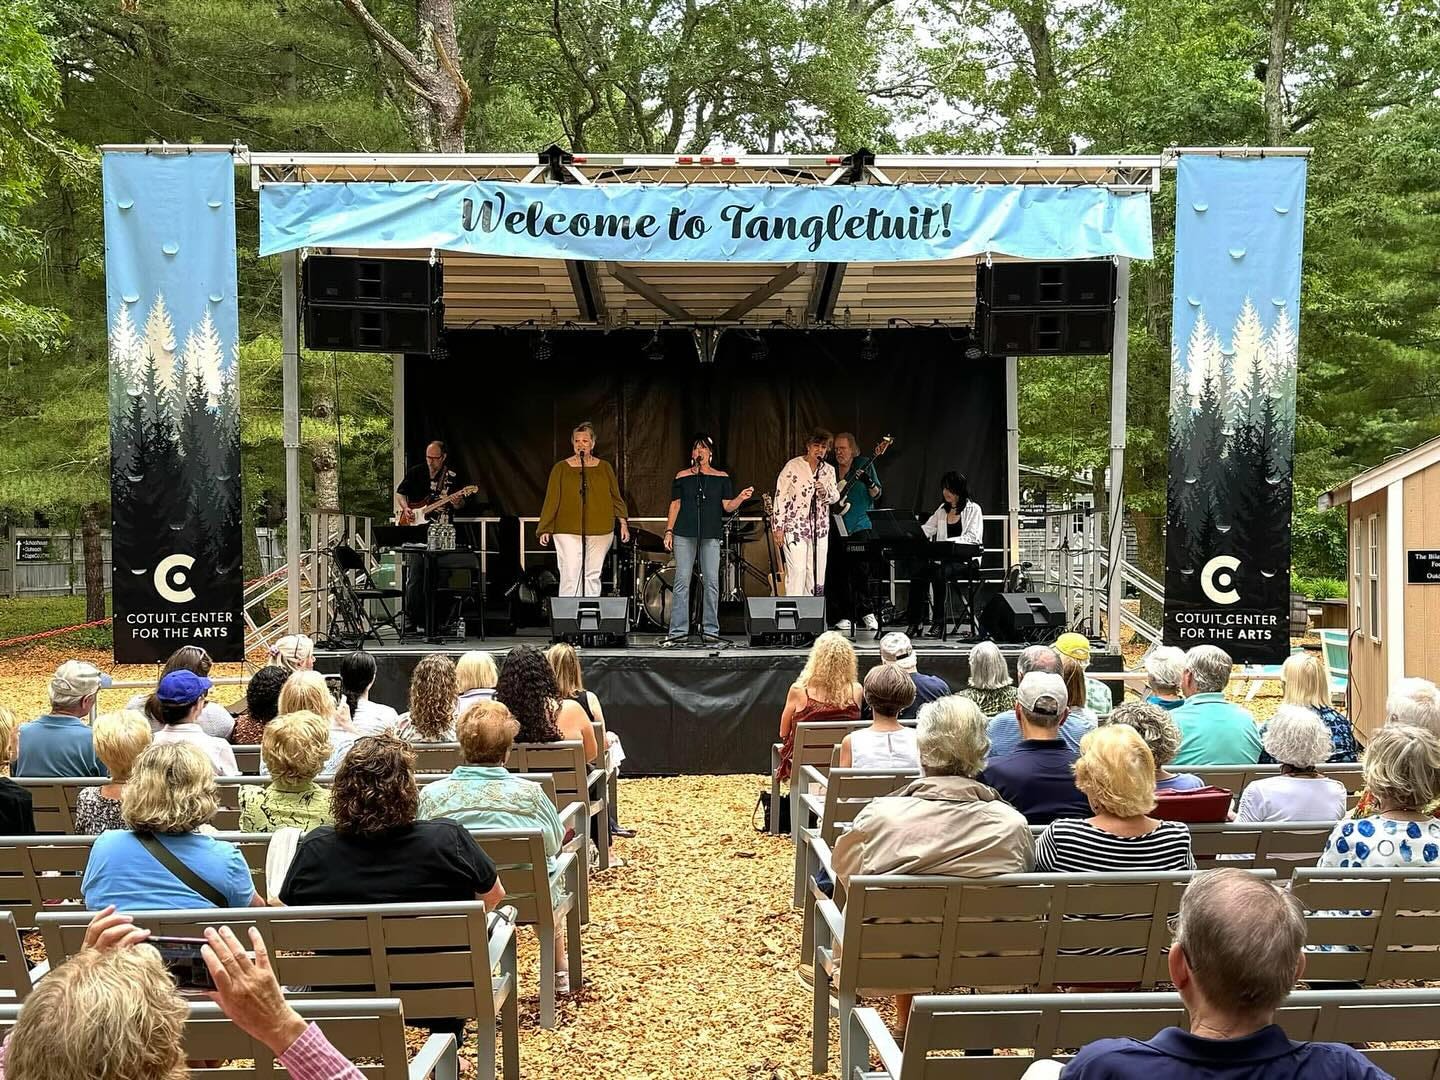 Like Boston Symphony Orchestra, Cape Cod has summer concert home. Get to know Tangletuit.